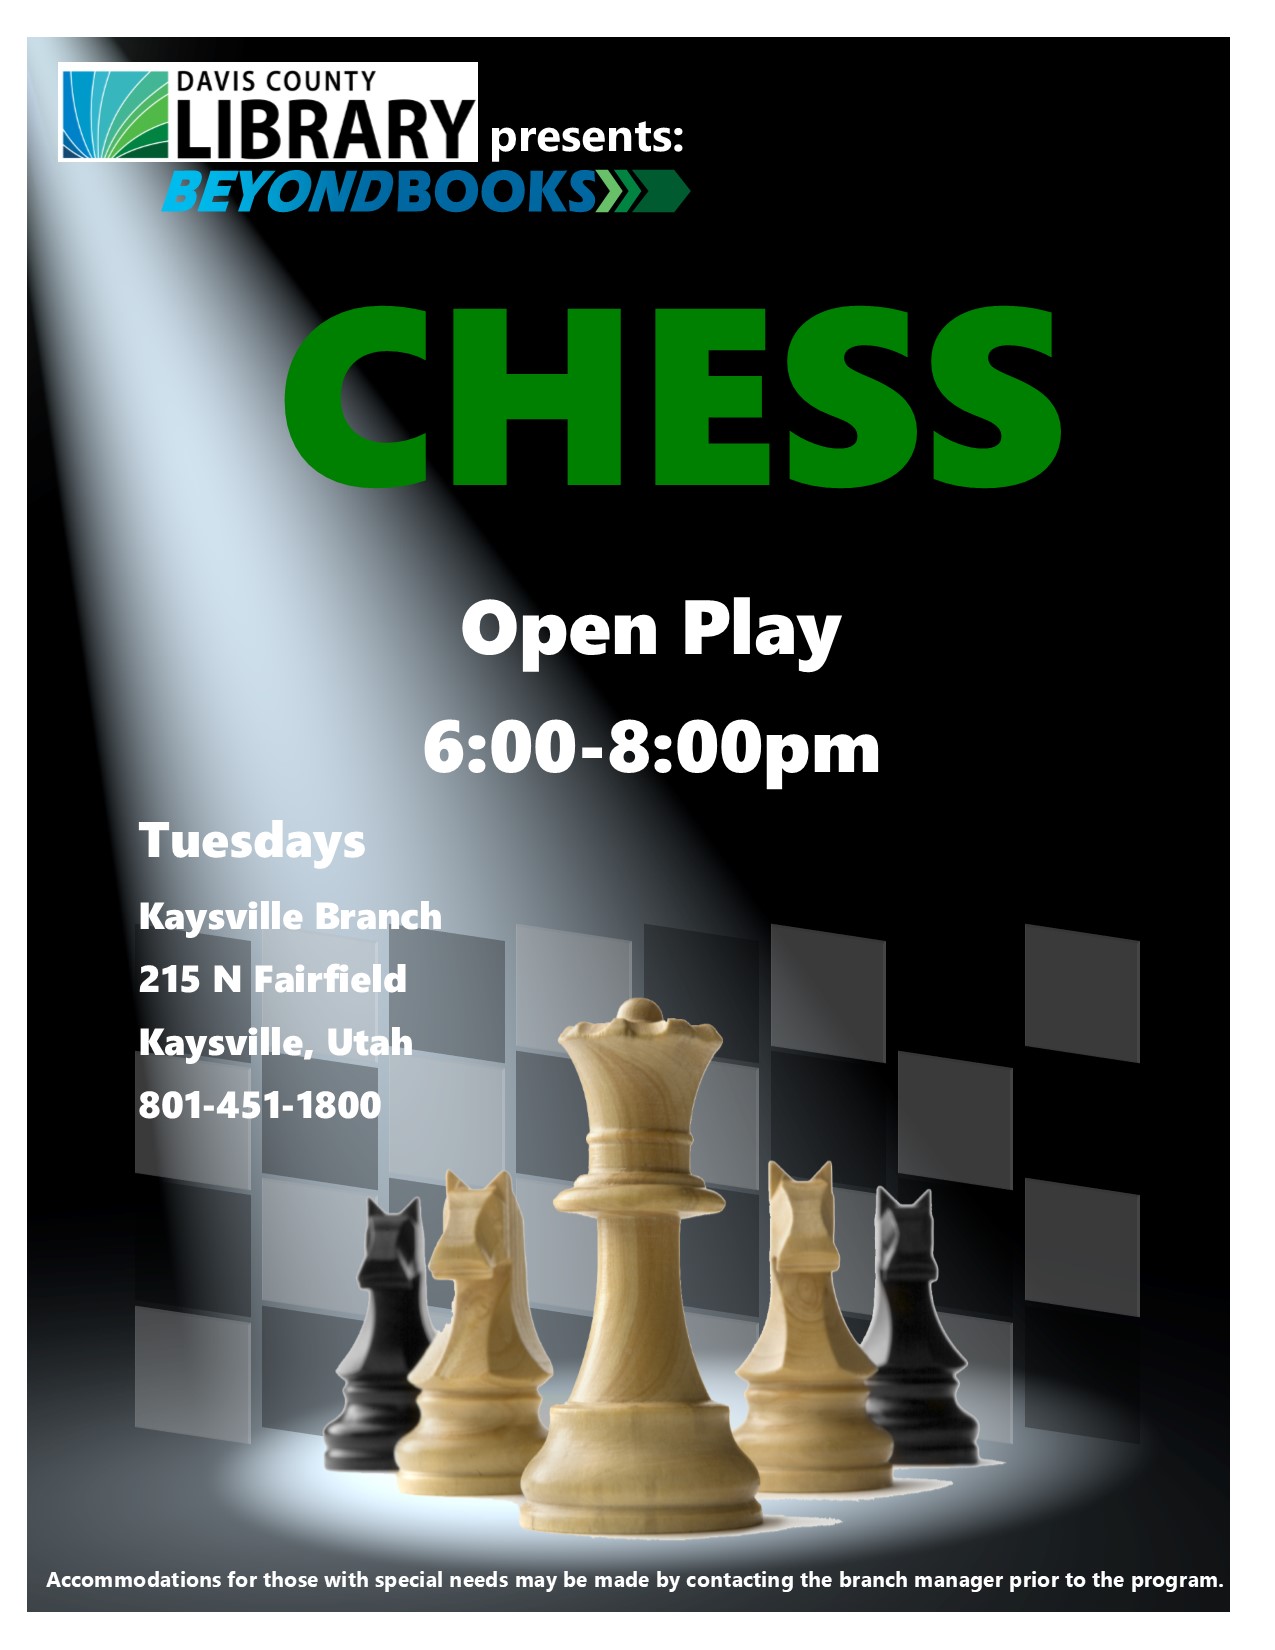 Chess Open Play Tuesdays 6-8 pm